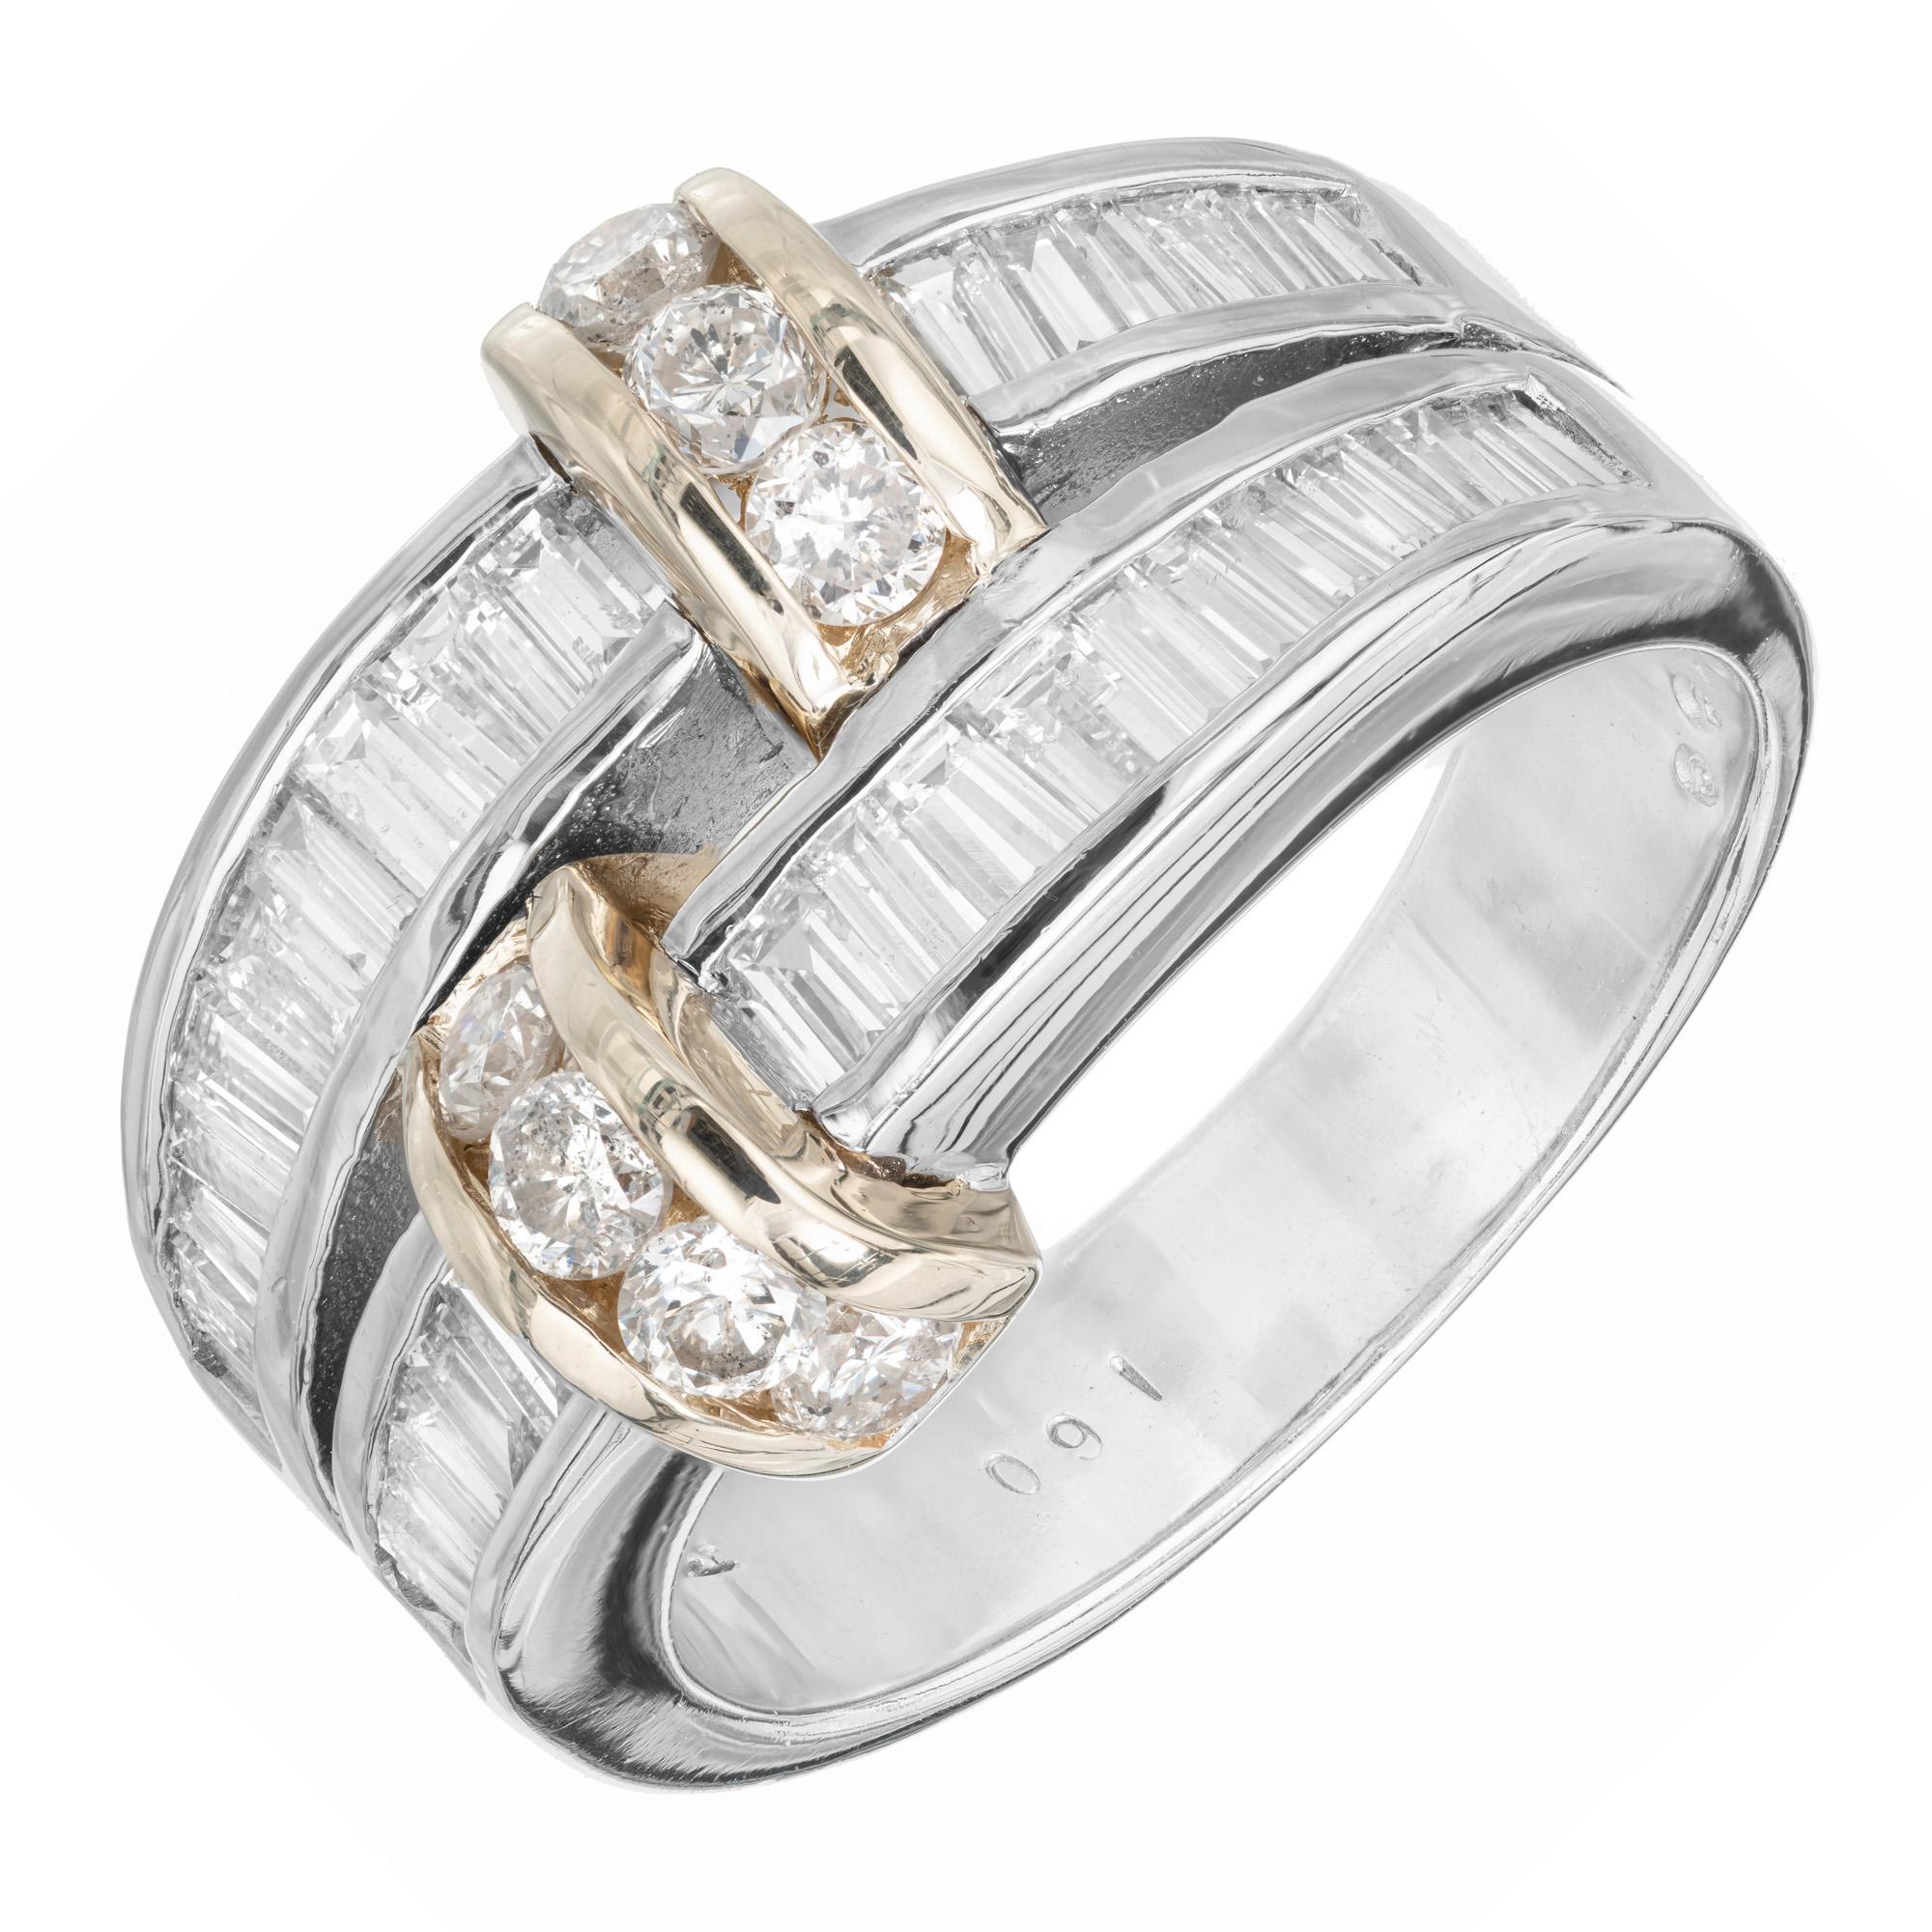 Double row off set two tone white and yellow gold diamond band ring. 33 baguette diamonds set in white gold with 8 round accent diamonds in yellow gold. 

33 baguette diamonds, I-J SI approx. .90cts
8 round brilliant cut diamond, K-L SI approx.